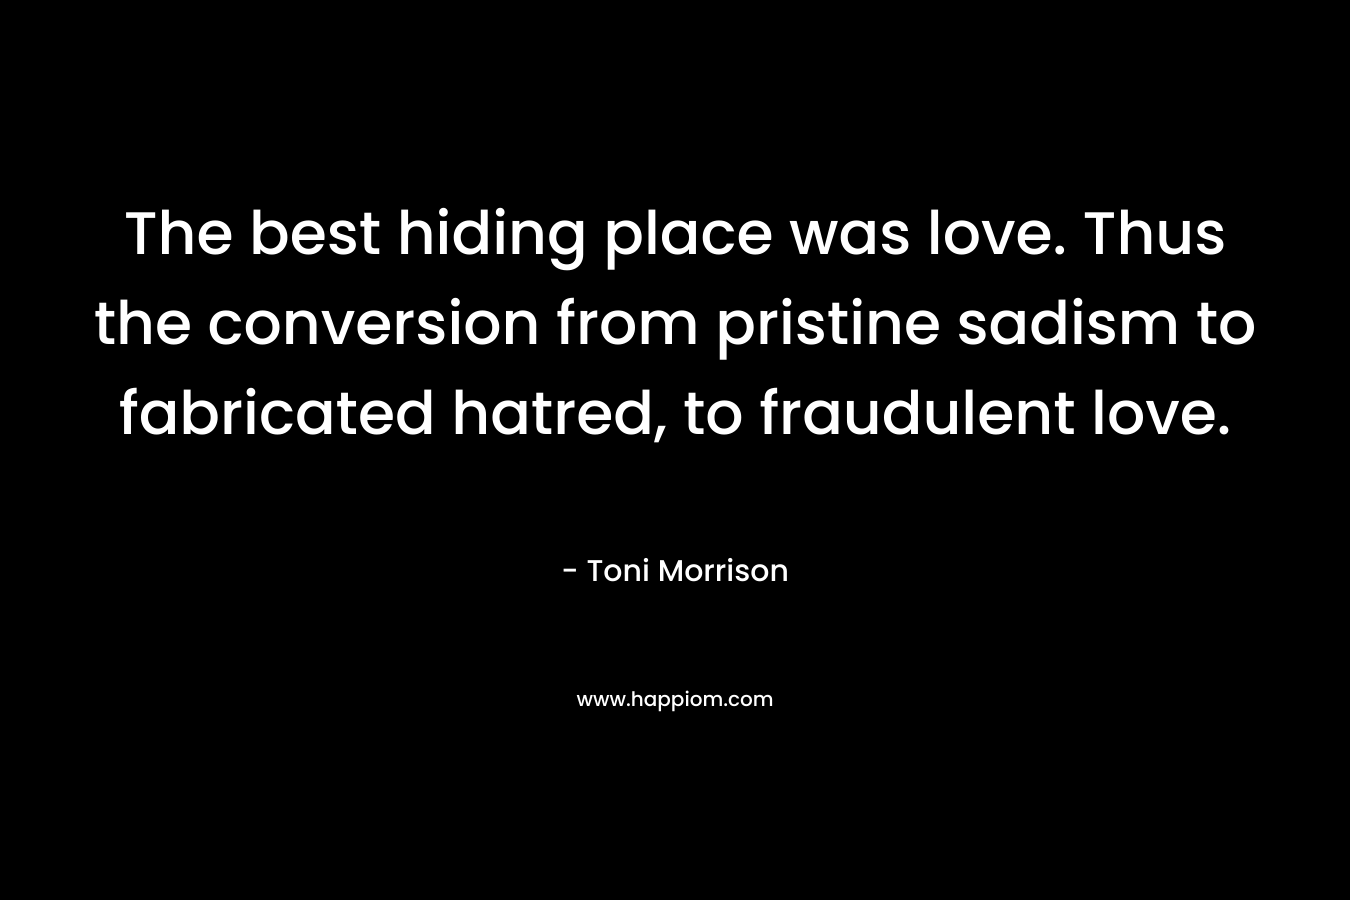 The best hiding place was love. Thus the conversion from pristine sadism to fabricated hatred, to fraudulent love. – Toni Morrison